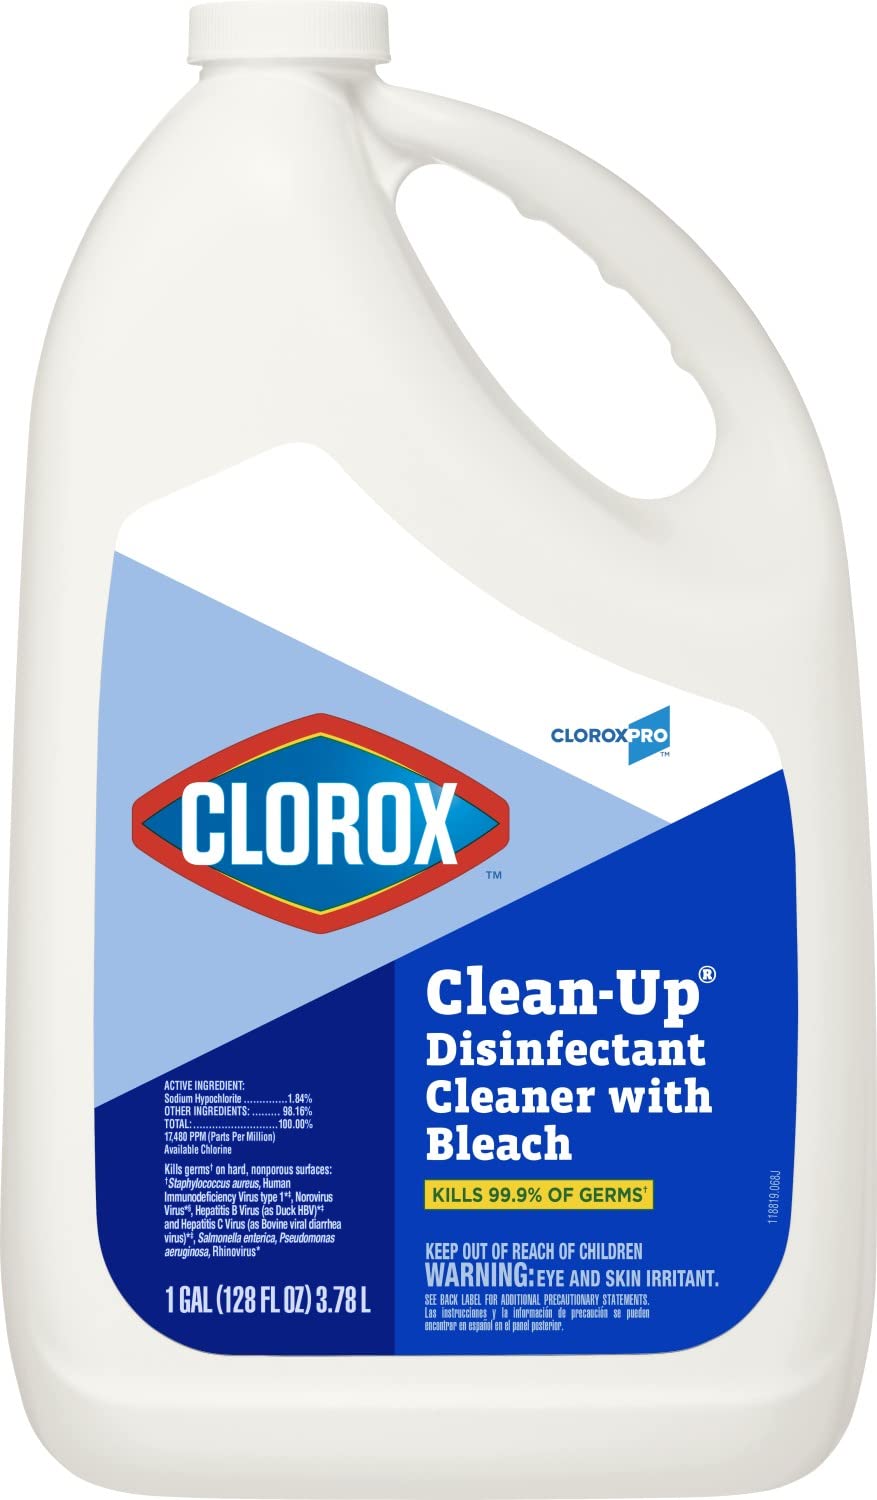 128-Oz. CloroxPro™ Clorox Clean-Up® Disinfectant Cleaner with Bleach Refill $6.72 + Free Shipping w/ Prime or on $25+